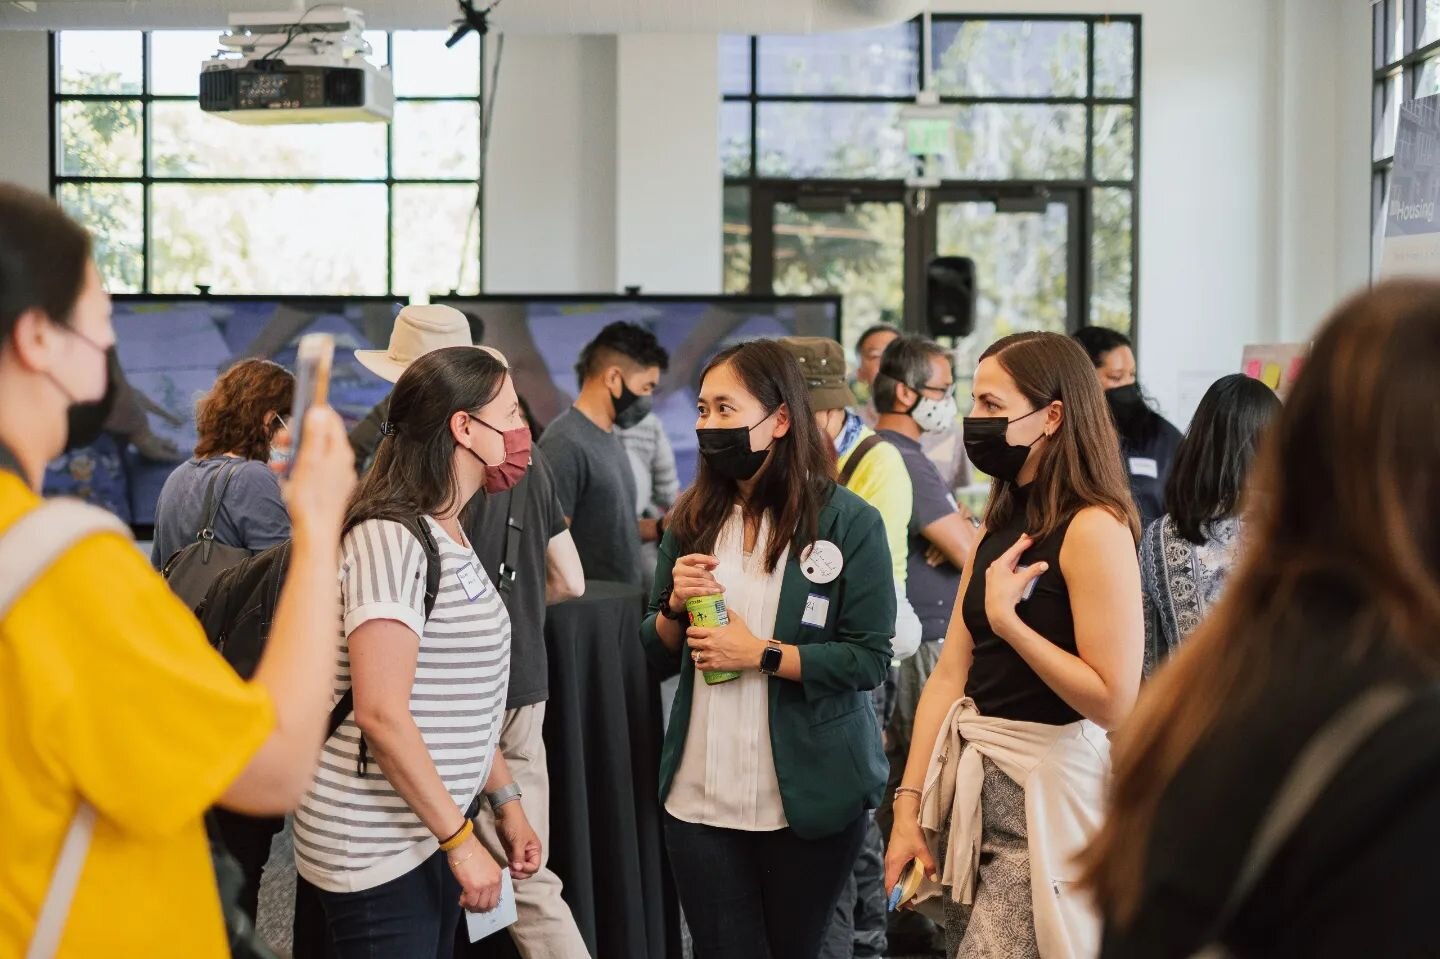 Energy was flowing at Downtown West&rsquo;s first Open House of the year!
With over 200+ attendees, Sitelab, @google and @lendlease facilitated exercises and conversations with the community.

Photo credits: Erik Quiocho @erikjquiocho 

#downtownwest